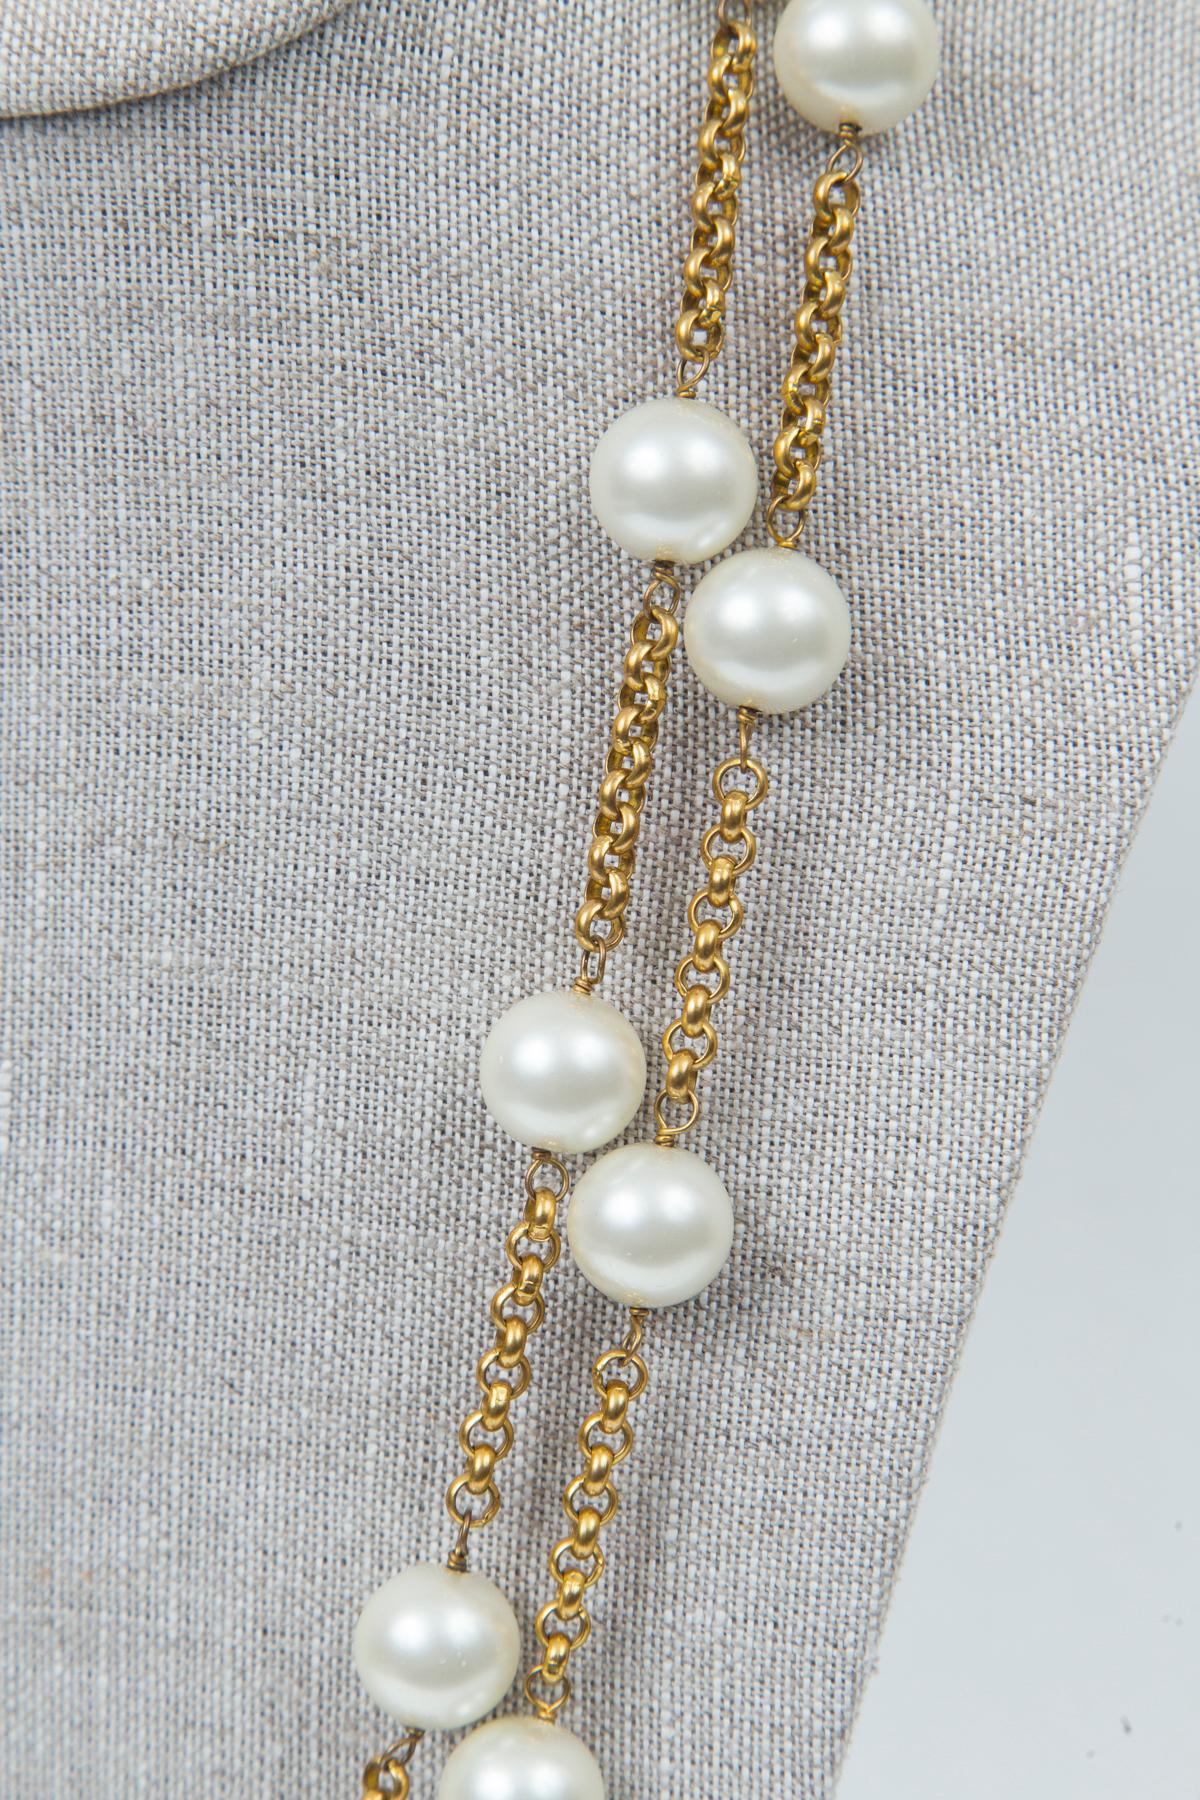 Chanel Long Gold and Pearl Necklace, Stamped with Chanel, CC, Made in France, 29 (Season 29, designed by Victoire de Castallane in the late '80s)